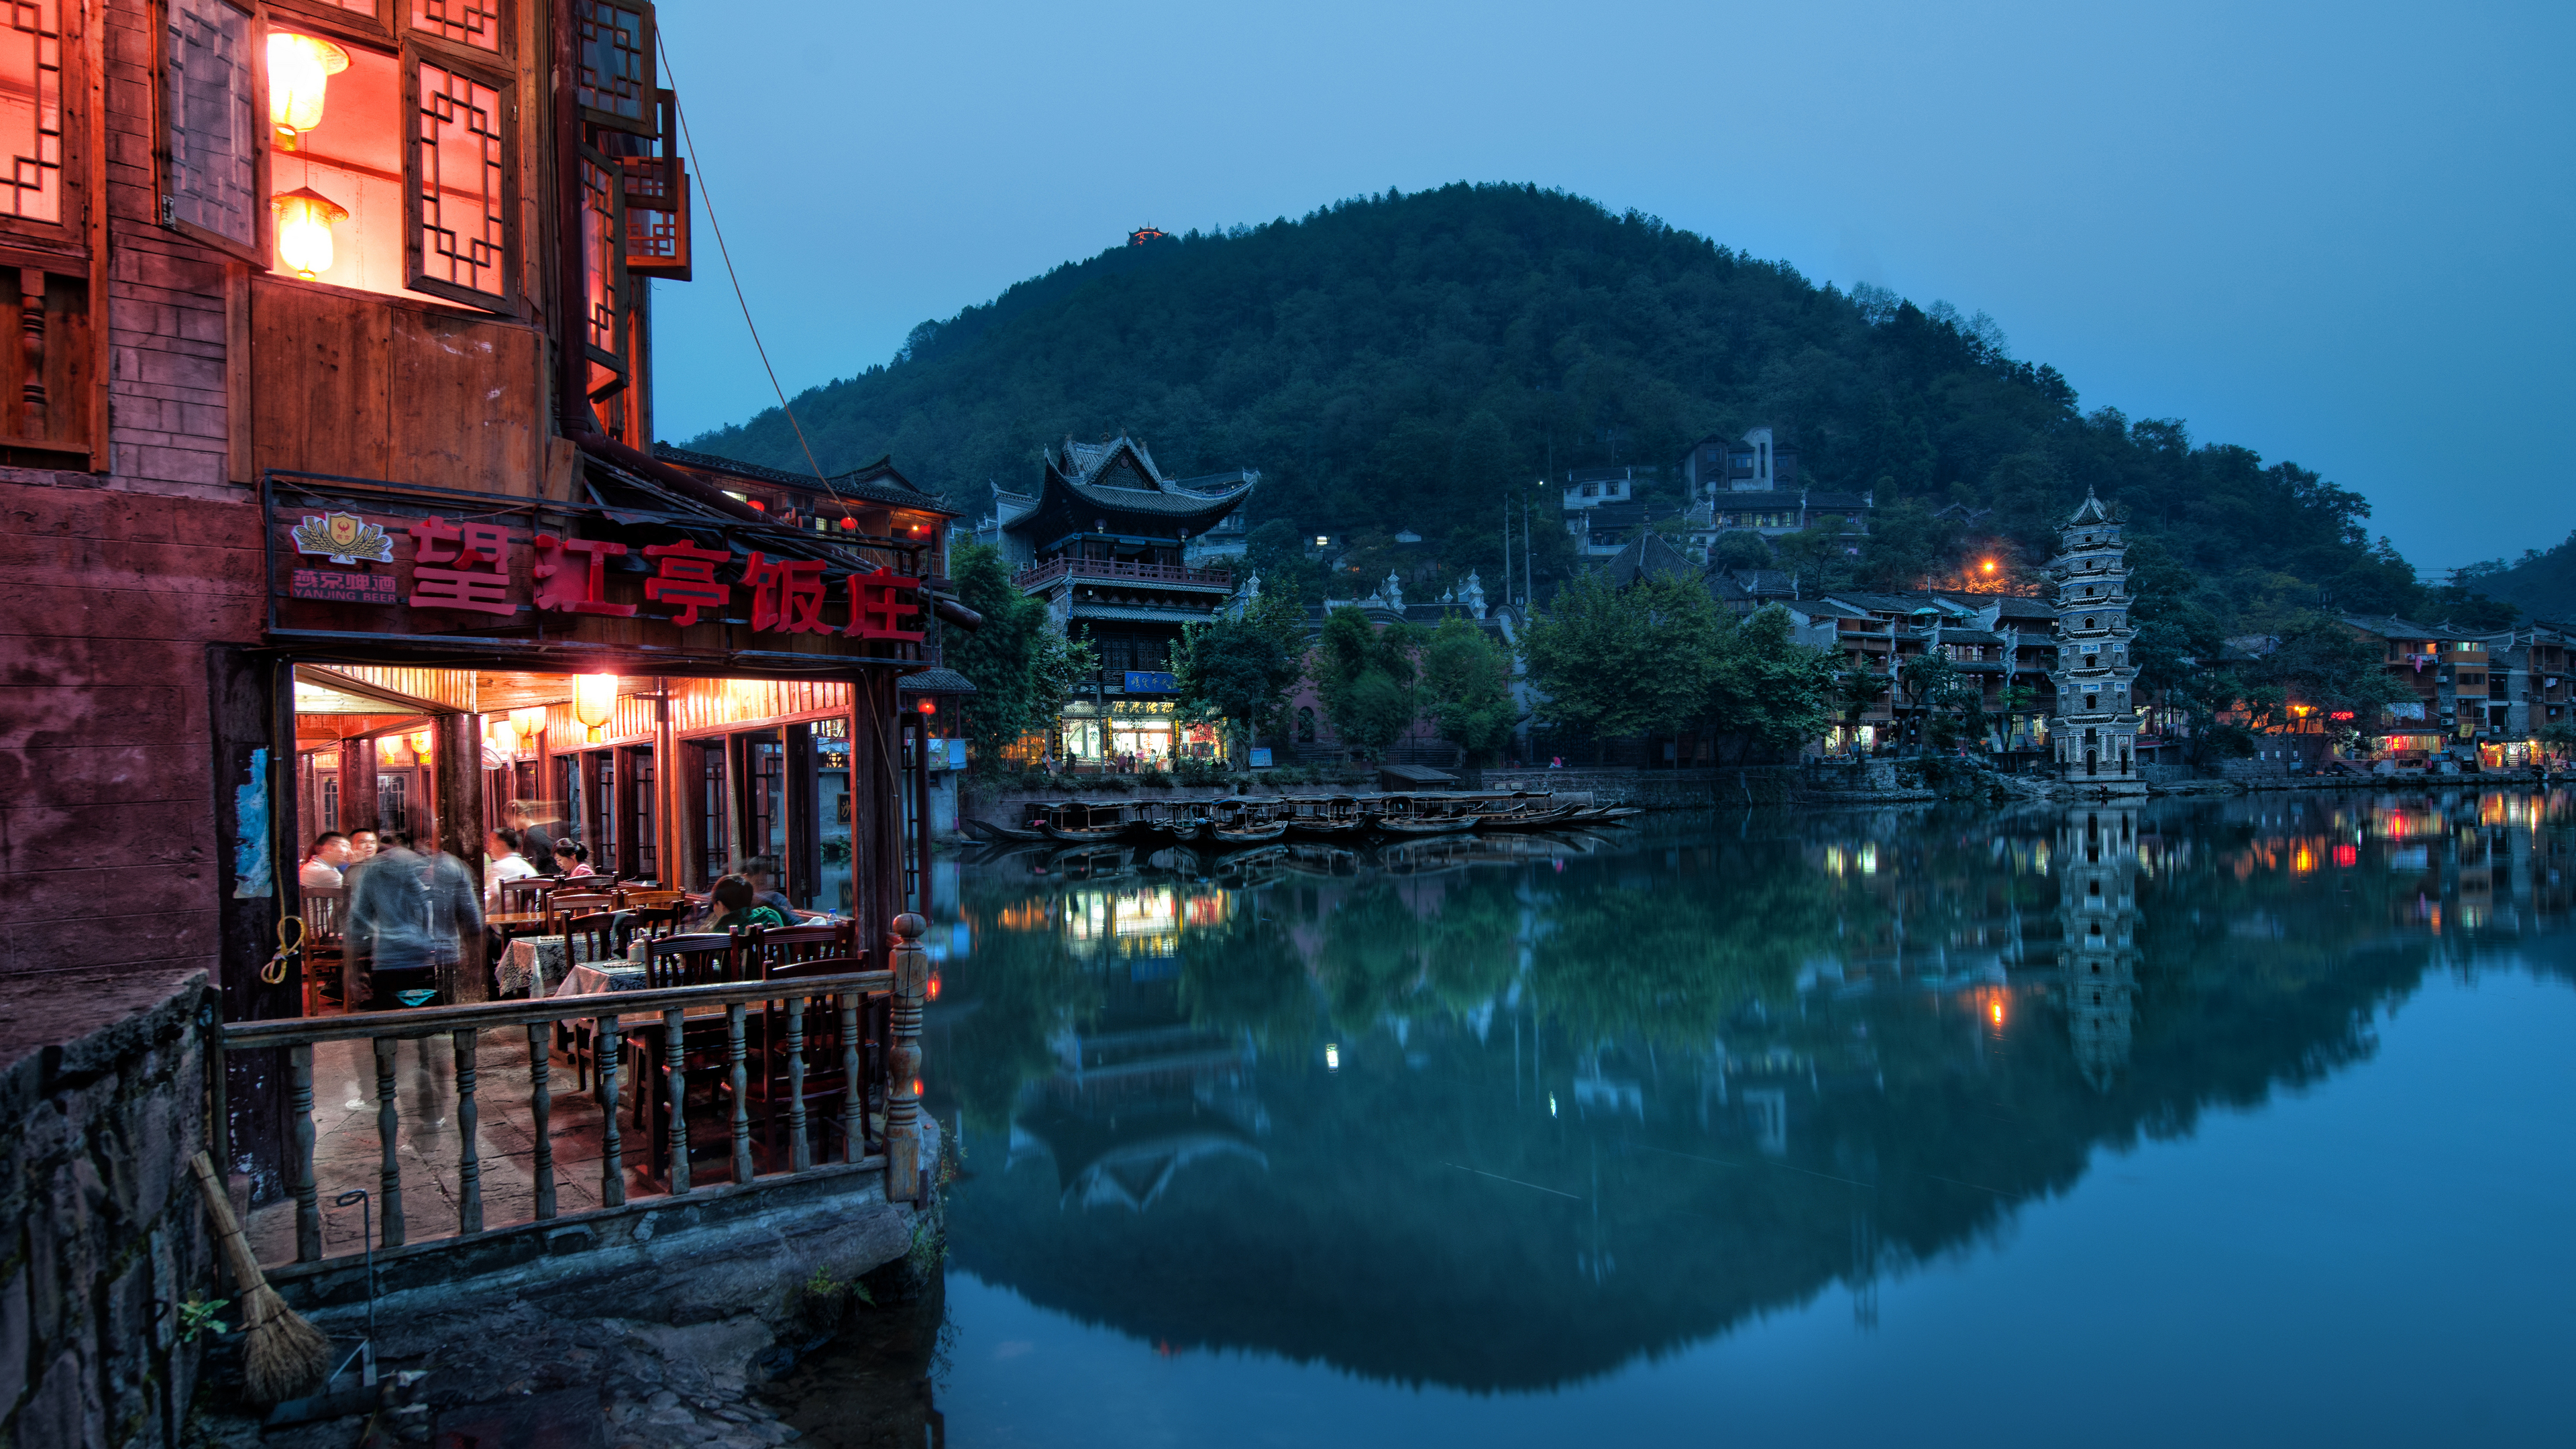 General 3840x2160 China photography water reflection mountains lights hills building restaurant people architecture Hunan Province